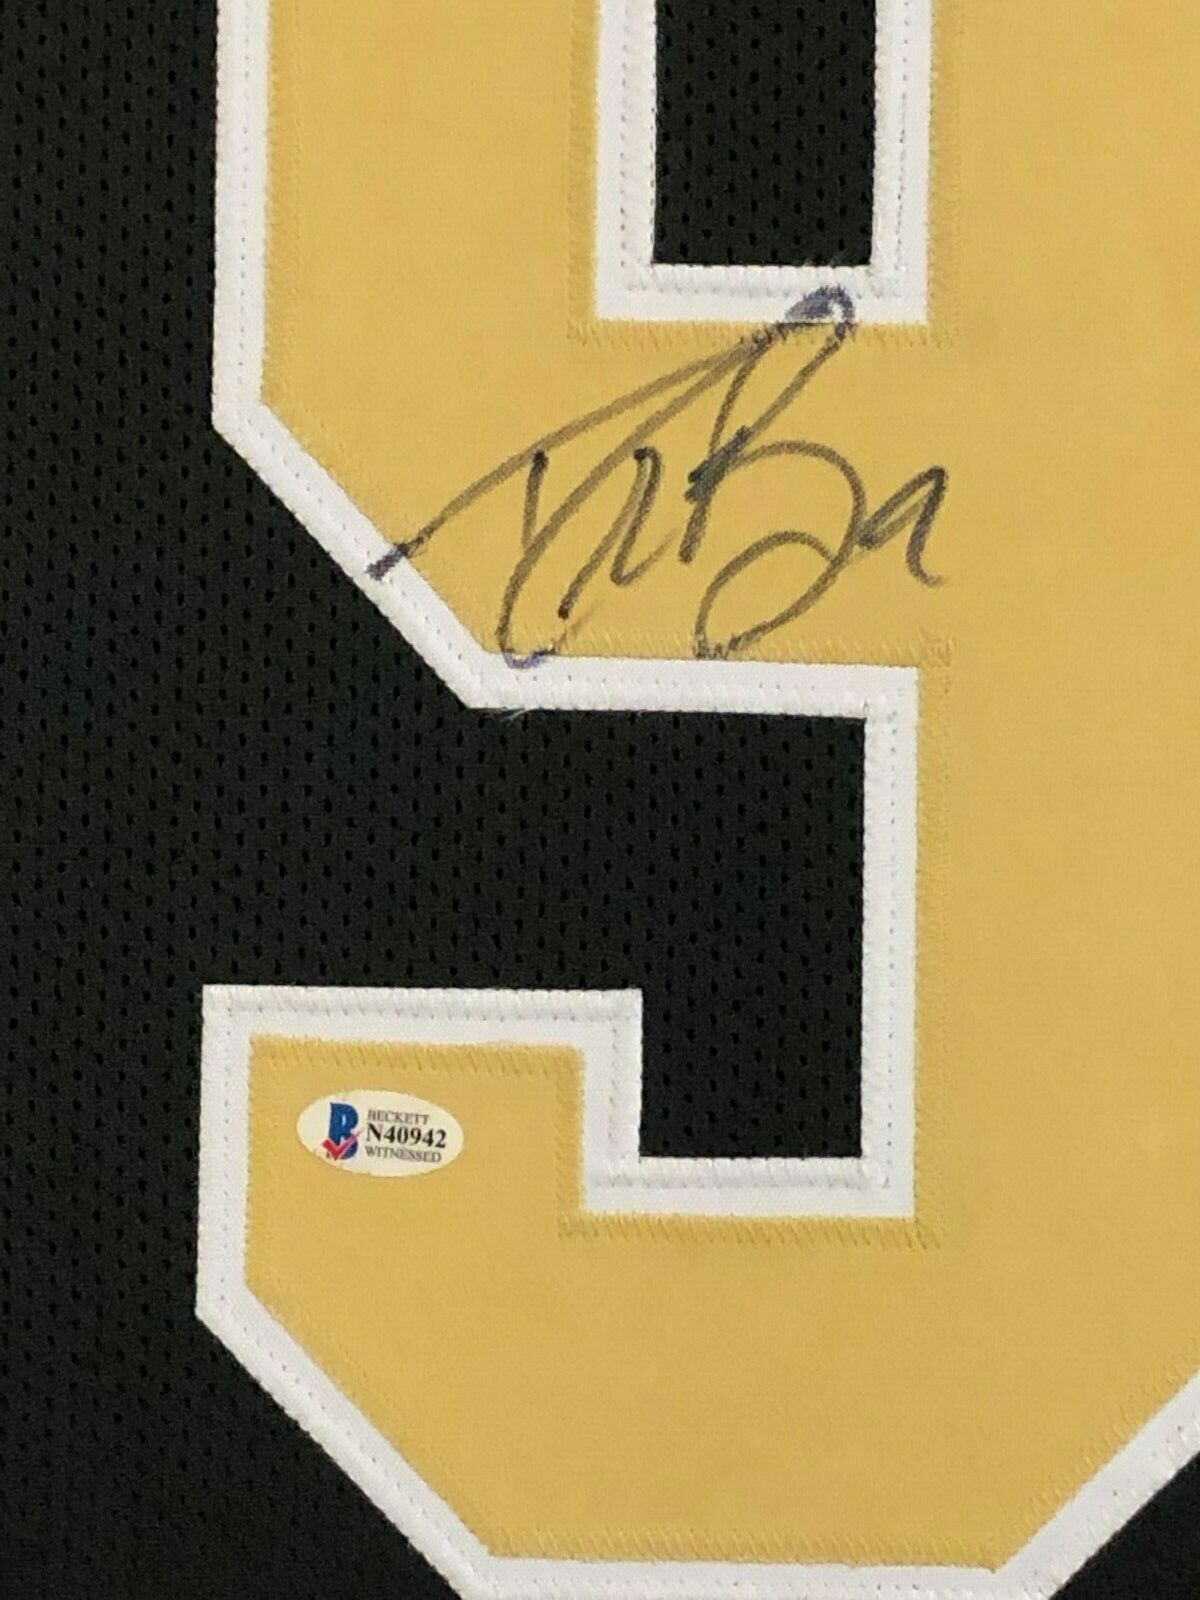 drew brees autographed jersey